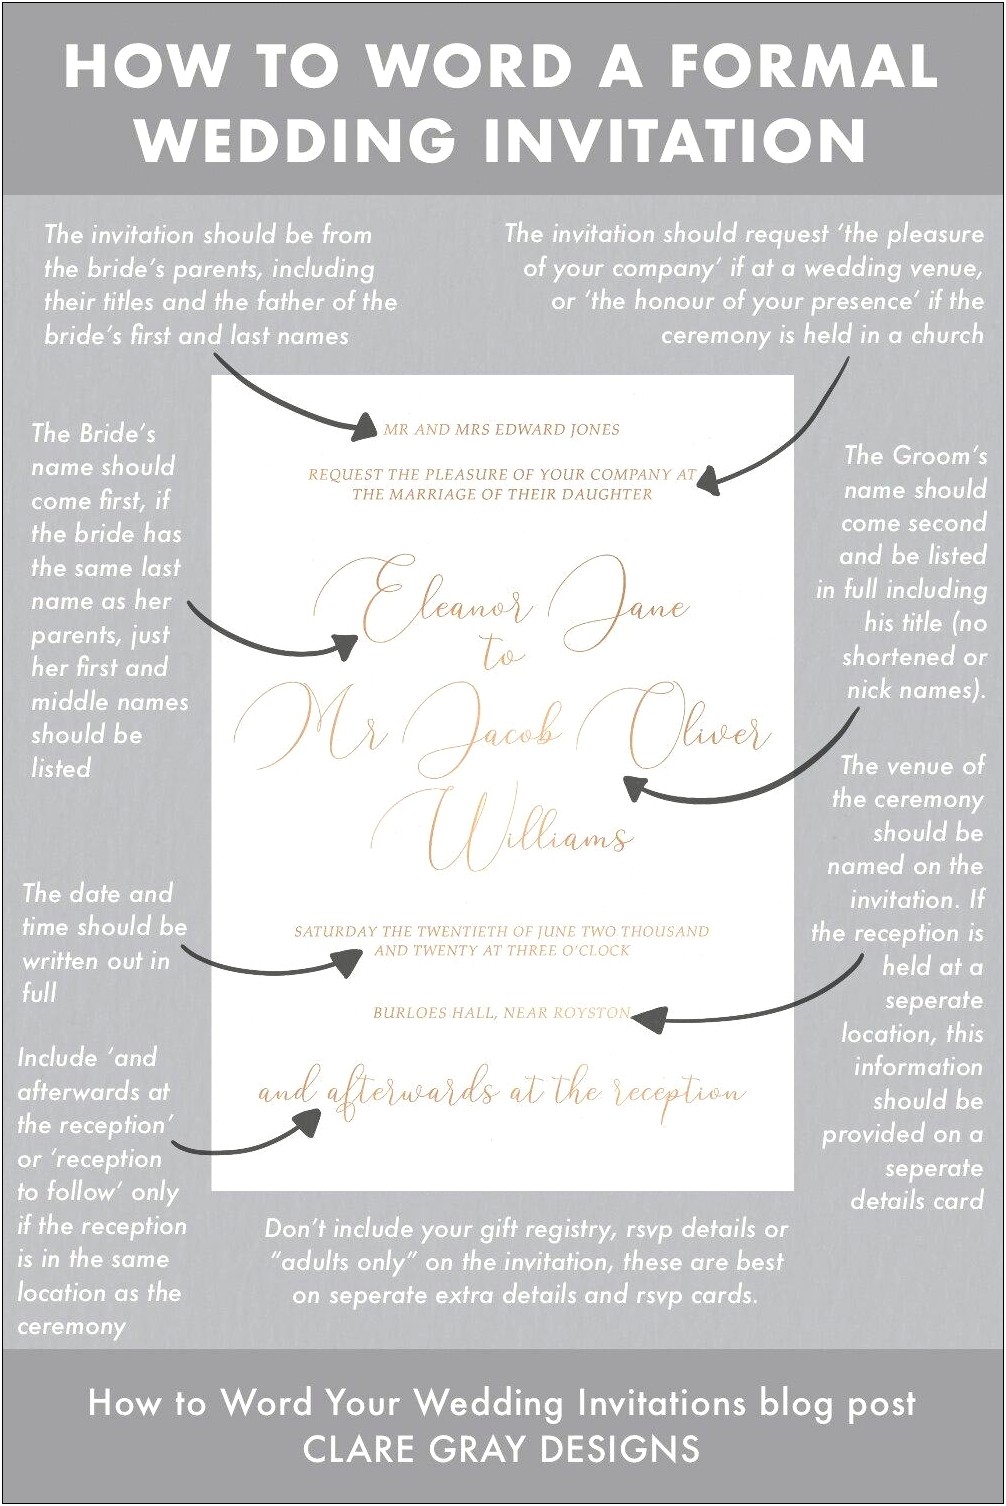 Do You Include Reception Information On Wedding Invitations